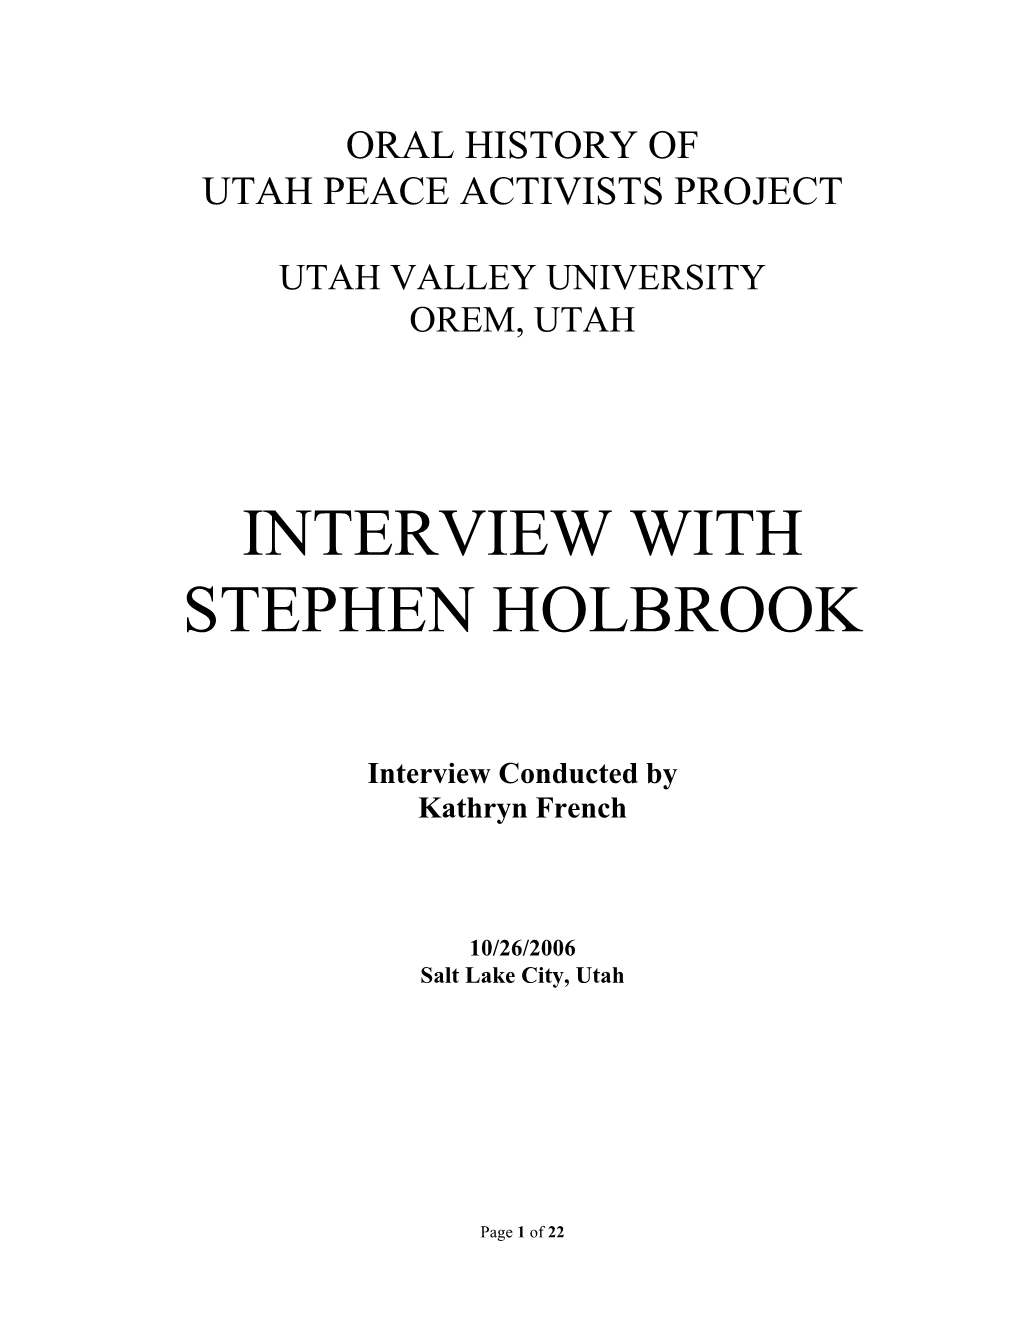 Interview with Stephen Holbrook